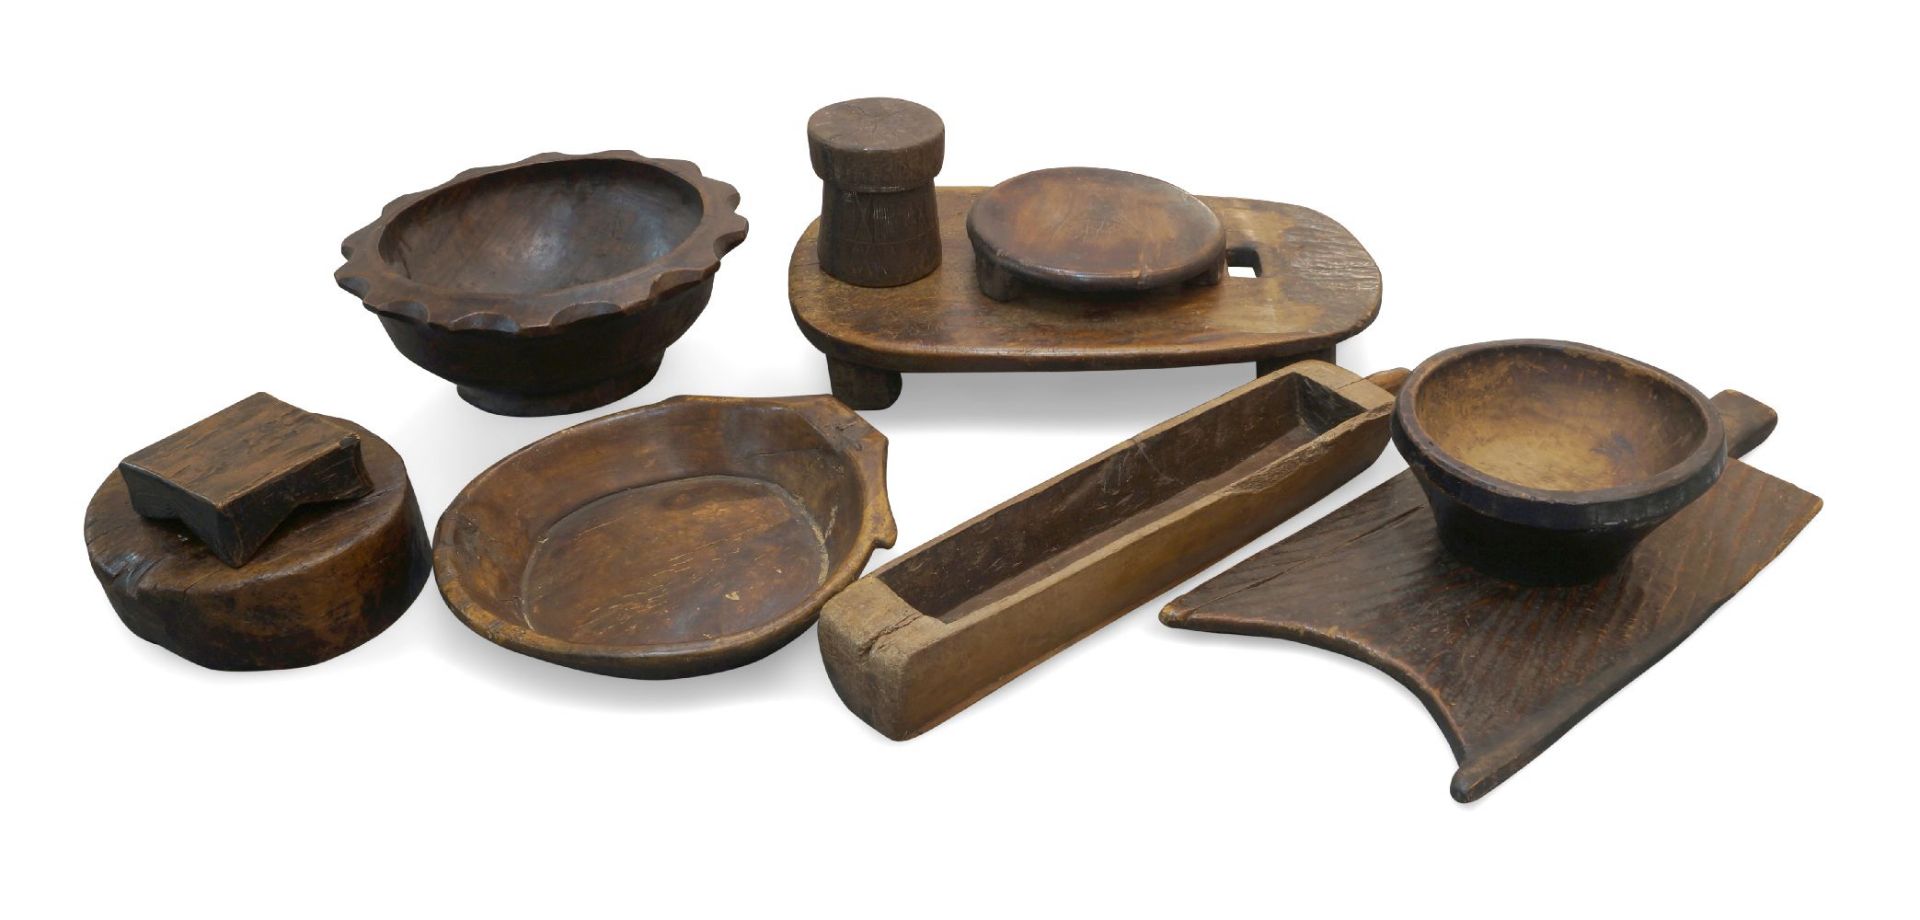 A quantity of African tribal food preparation utensils, 20th century, to include large chopping